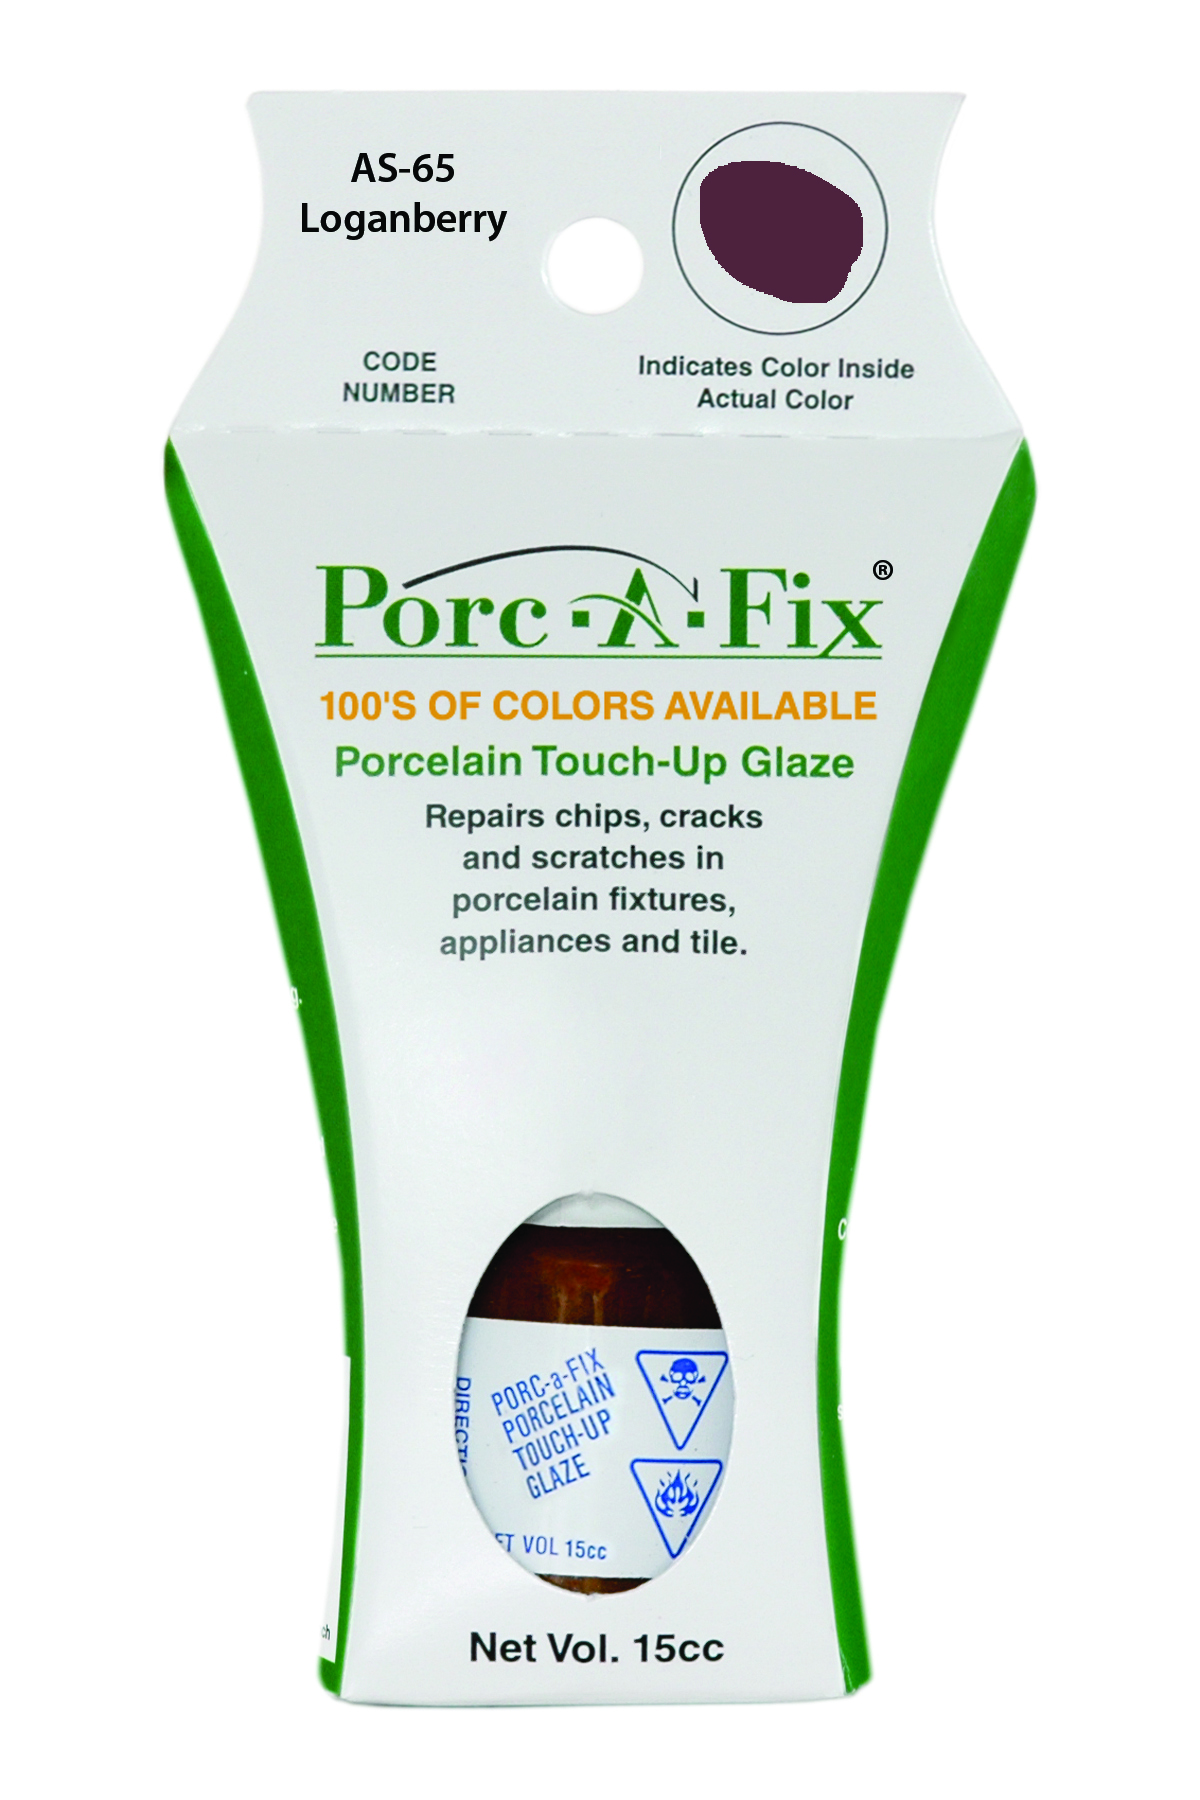 Fixture-Fix | AS-65 | Porc-A-Fix Touch-Up Glaze American Standard Loganberry - Compatible with American Standard 070900-2100A Touch Up Paint Kit - LOGANBERRY